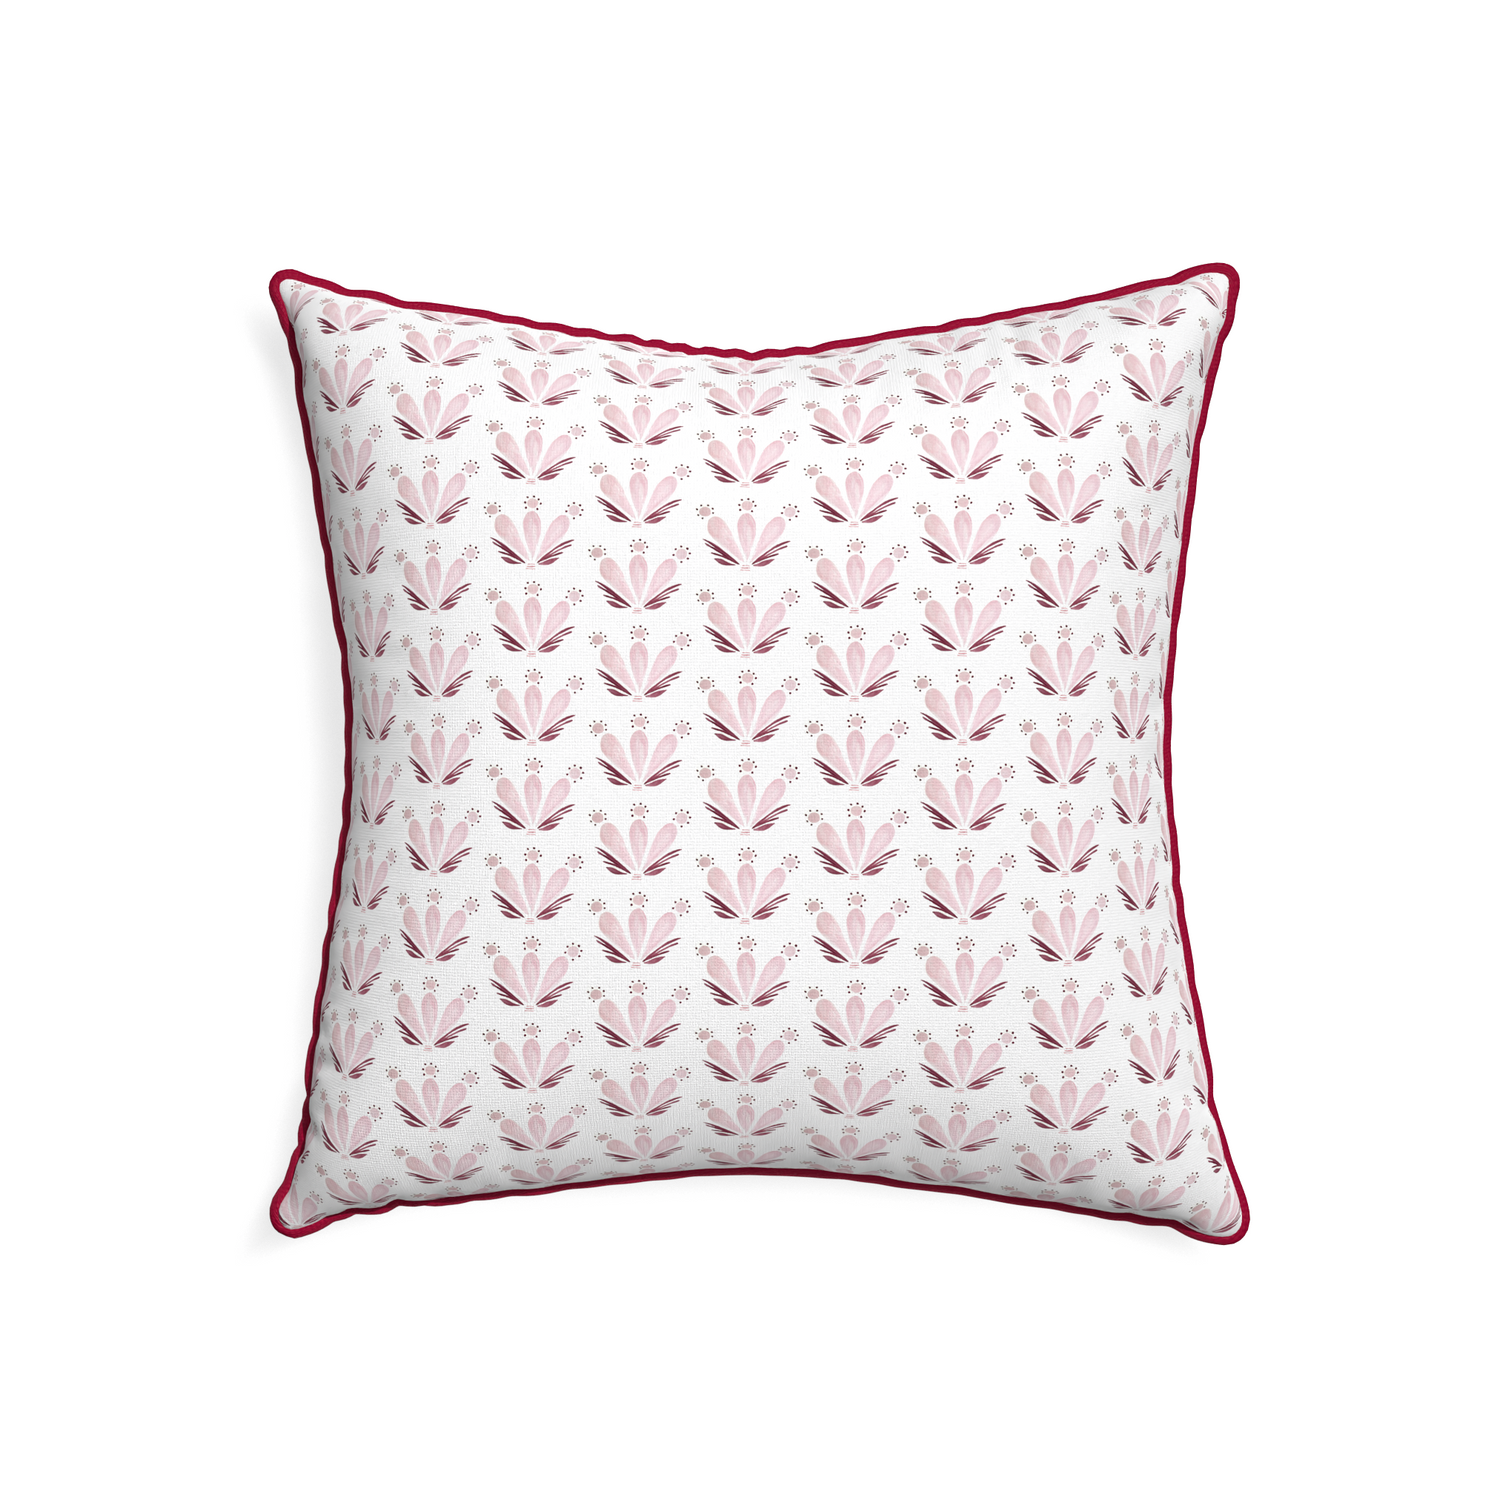 22-square serena pink custom pink & burgundy drop repeat floralpillow with raspberry piping on white background